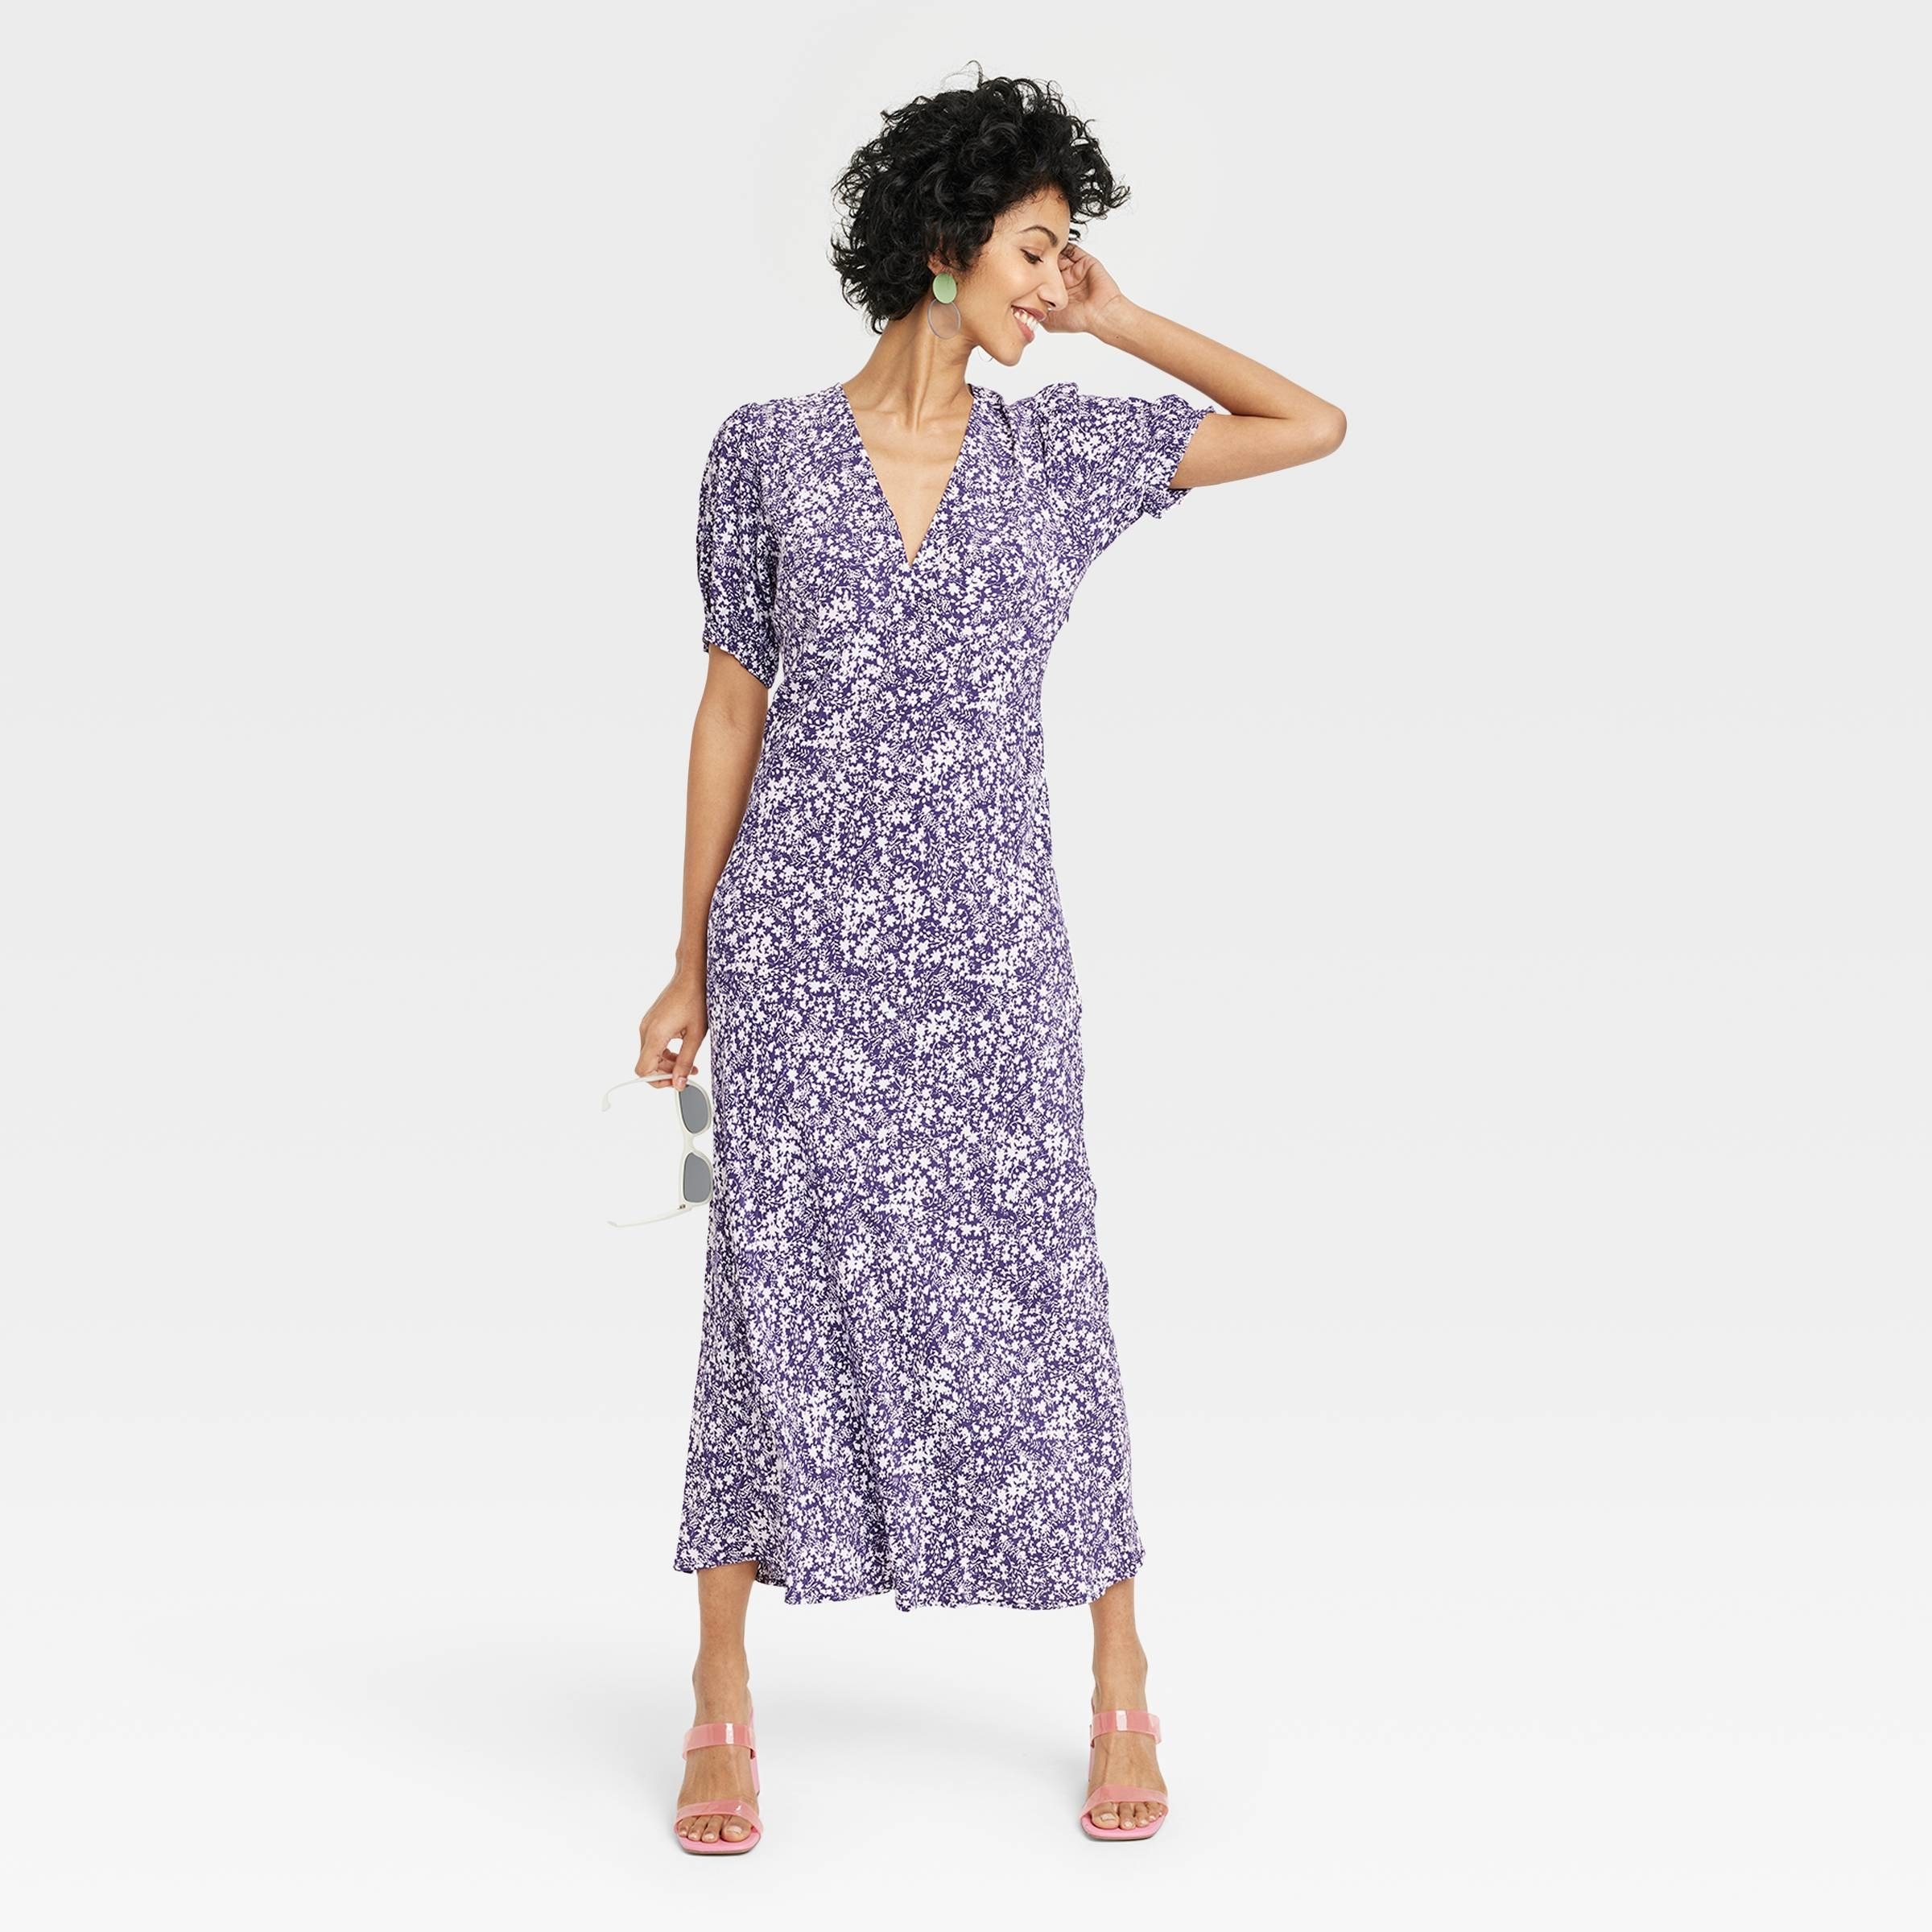 A model wearing the ditsy floral-print midi-length dress